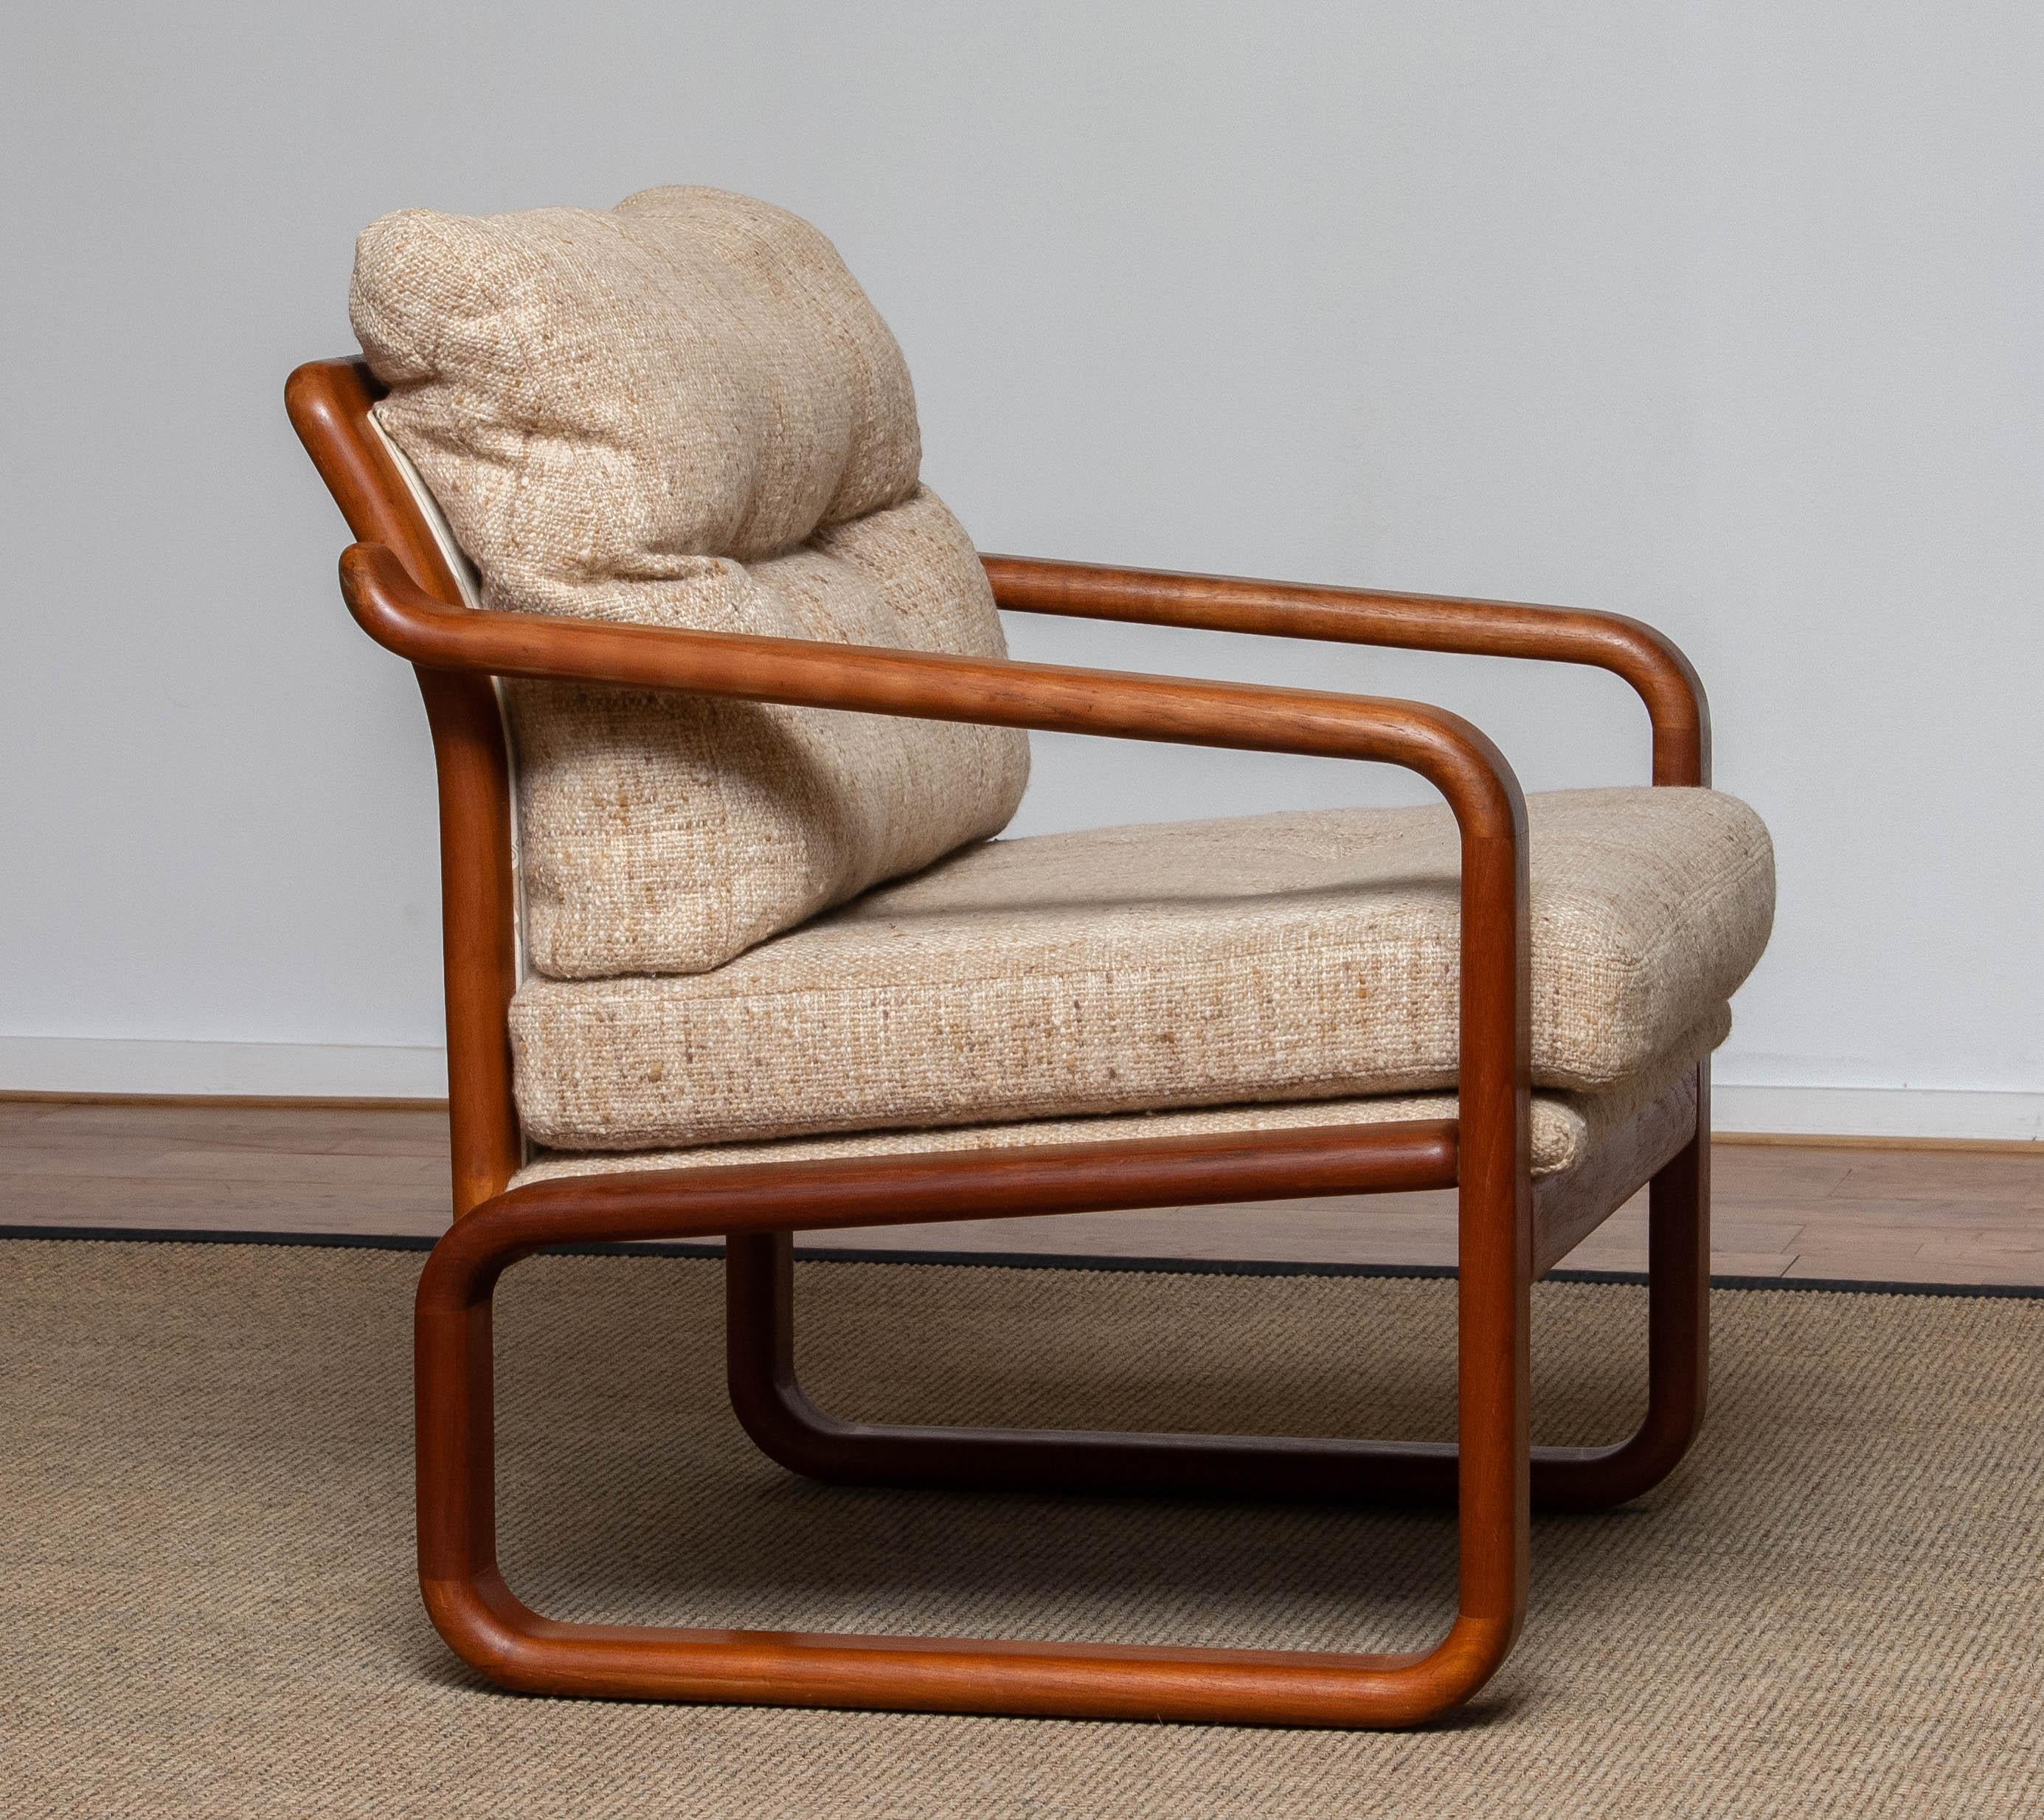 Danish 1980's Teak with Wool Cushions Lounge / Easy / Club Chair by HS Design Denmark For Sale